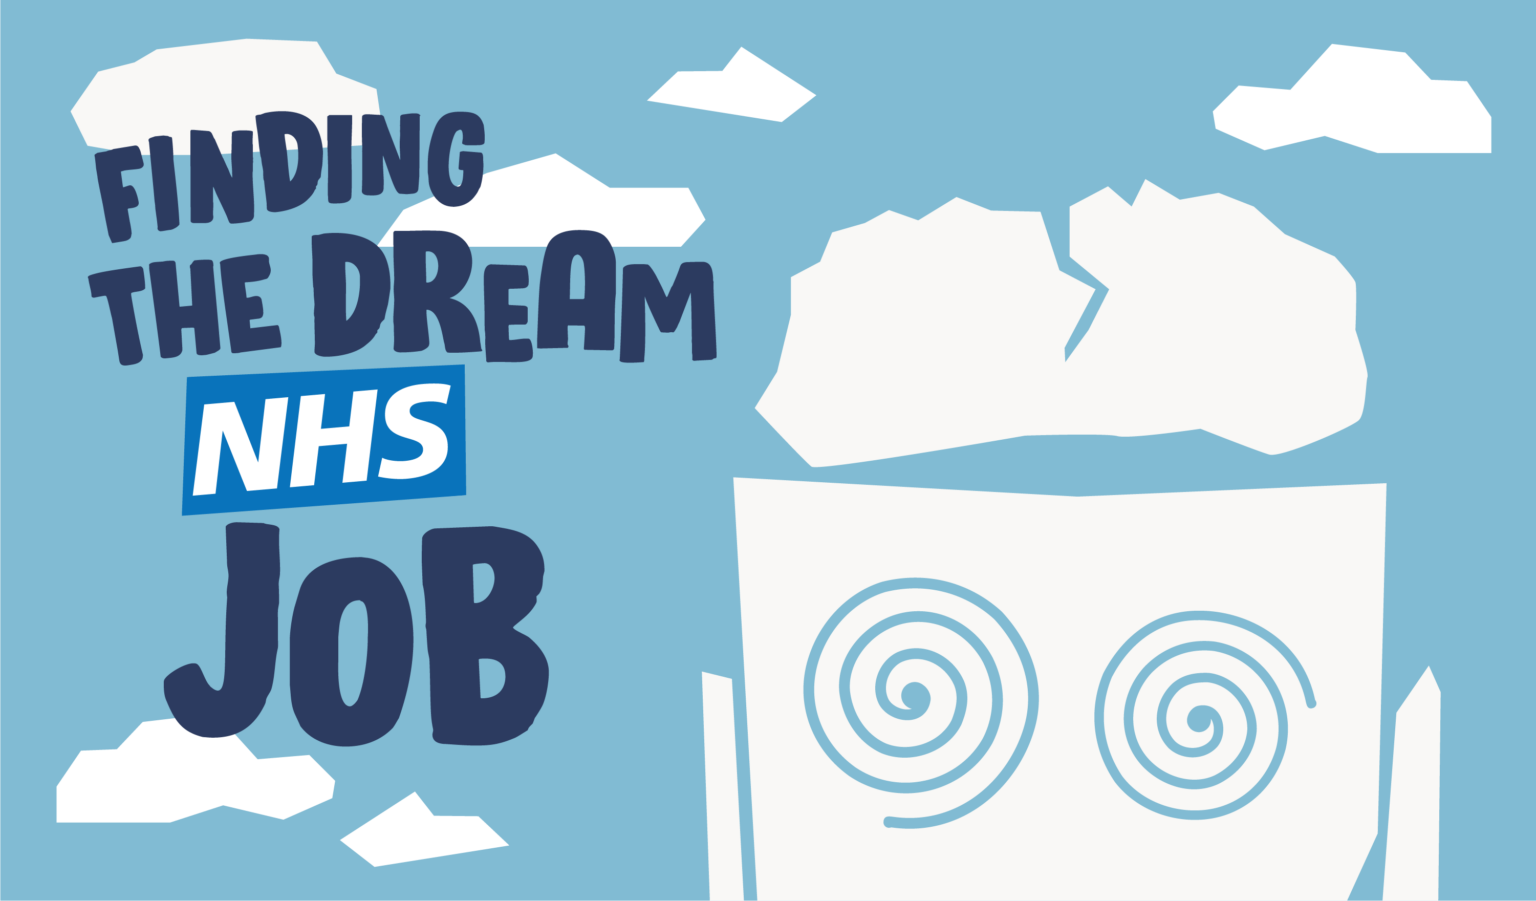 Finding the dream NHS job